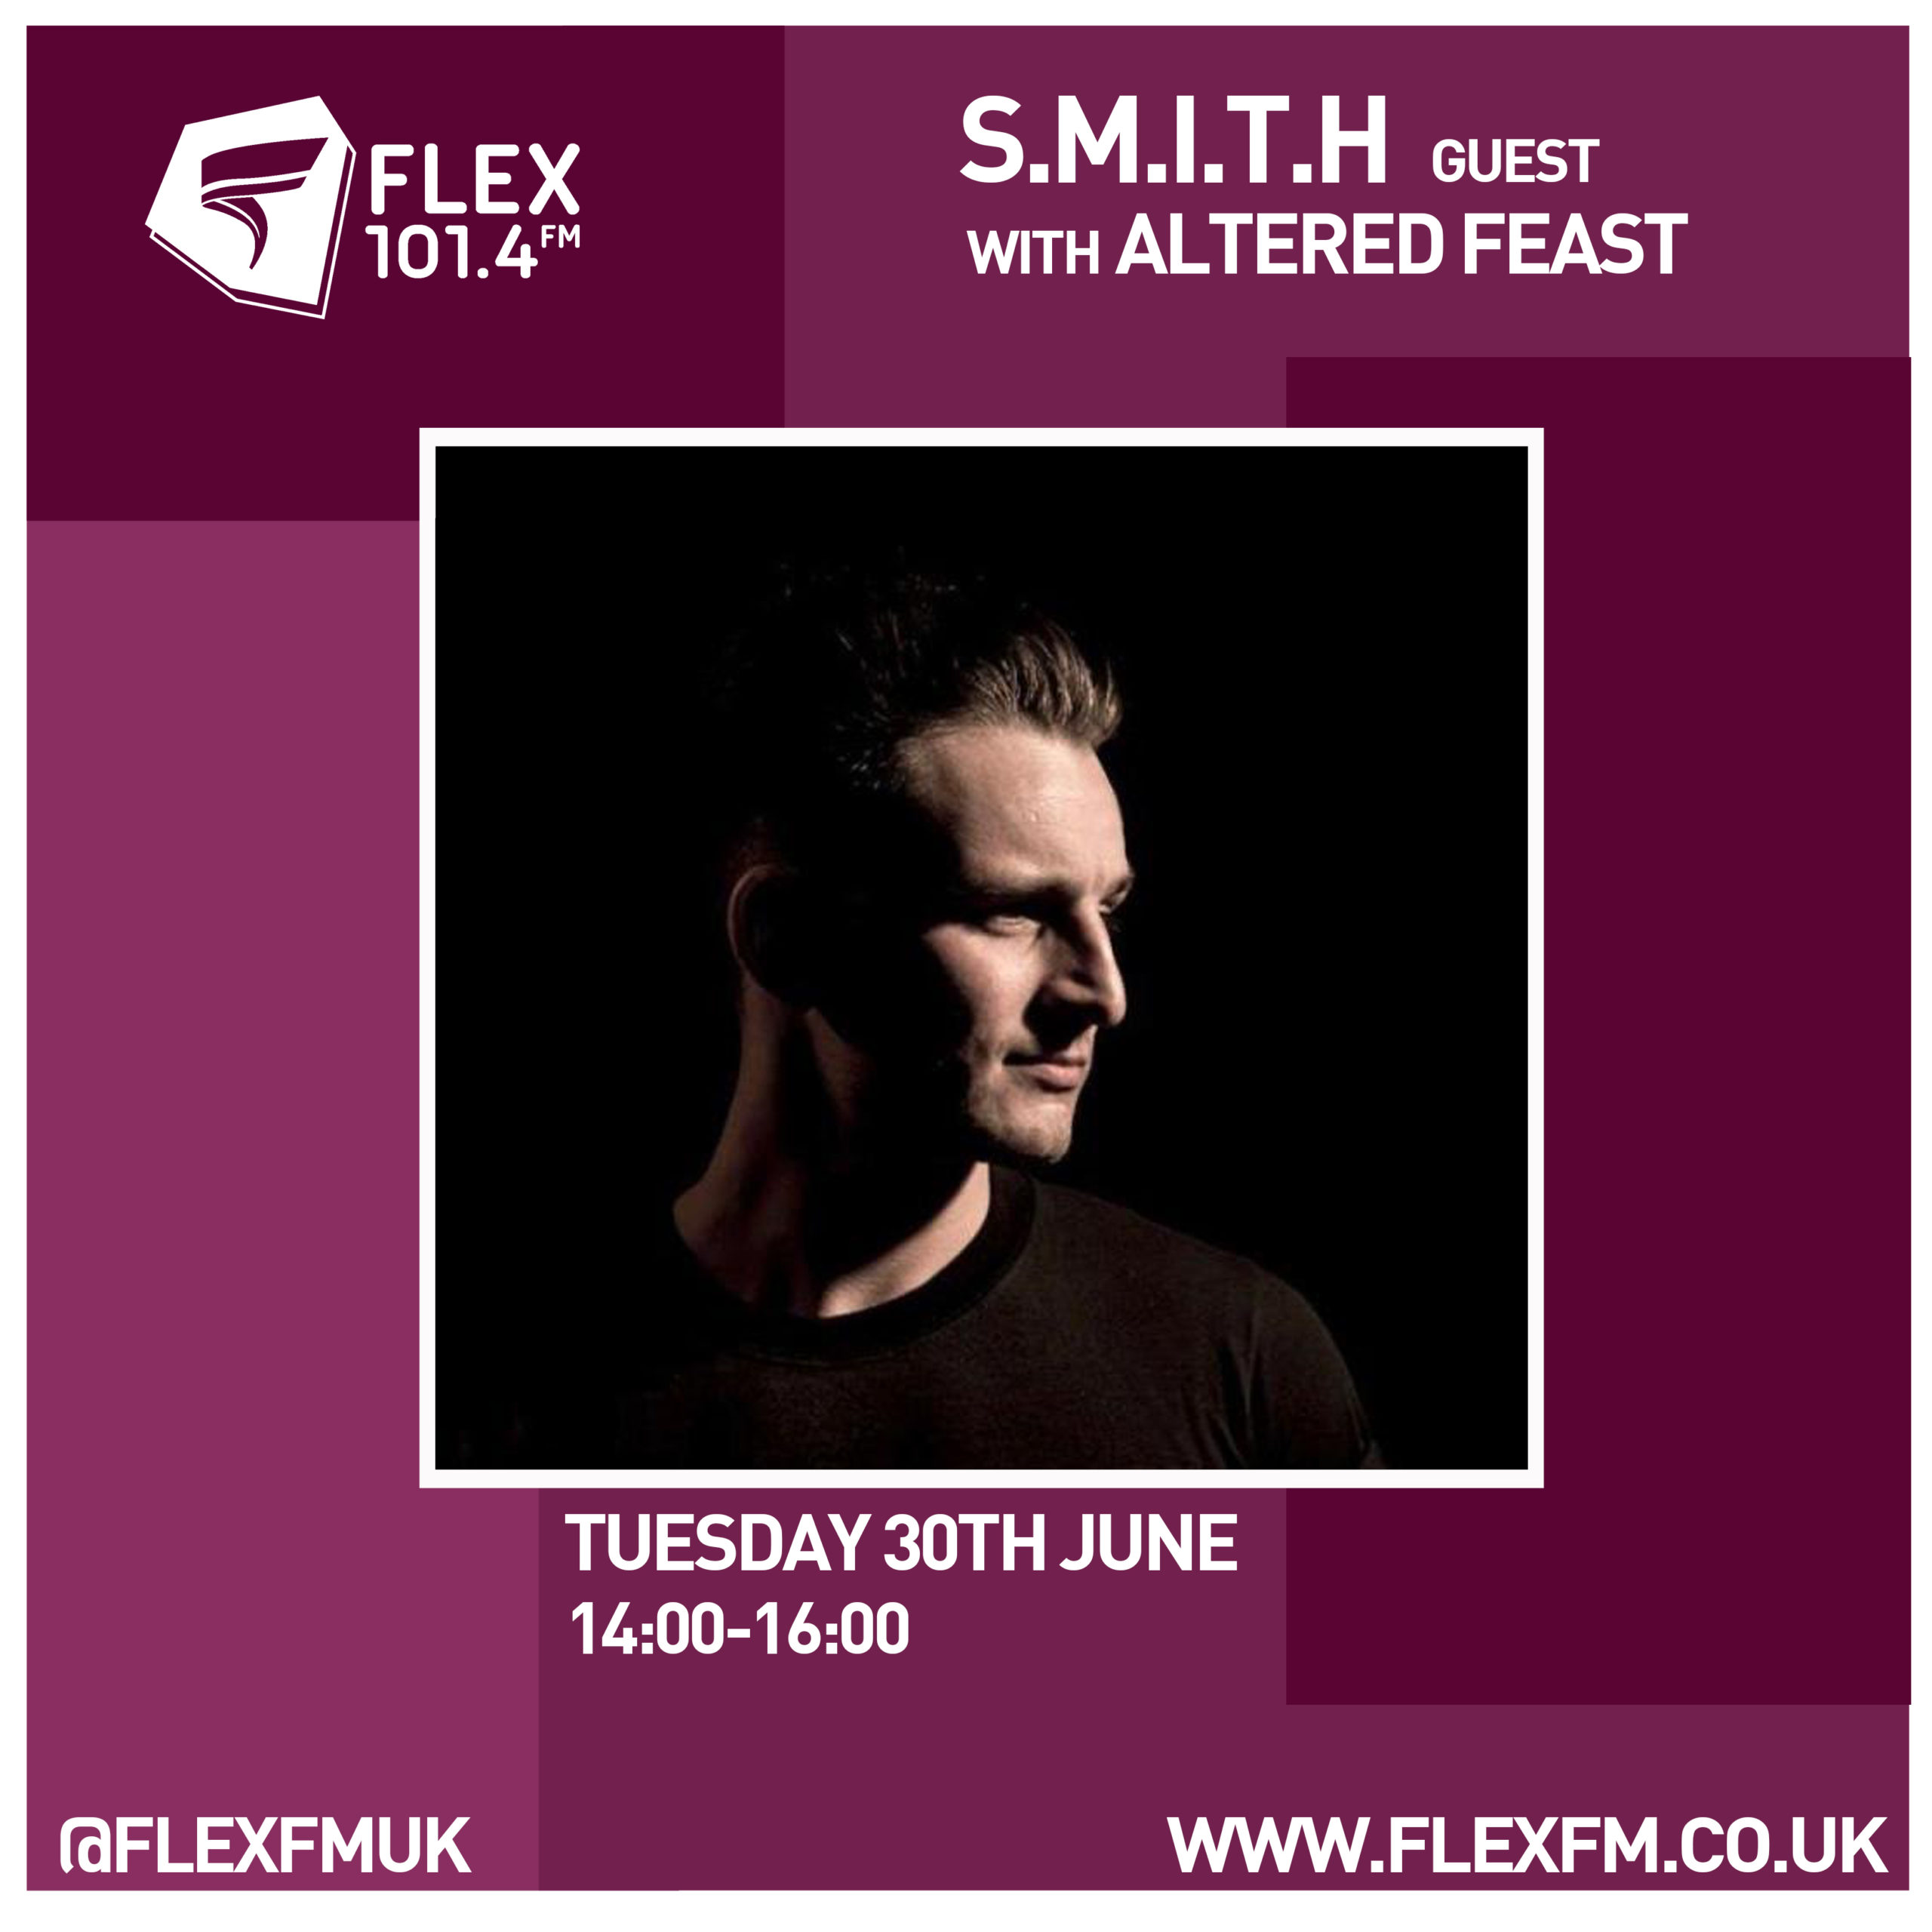 S.M.I.T.H guest with Altered Feast – Tuesday 30th June – 14:00-16:00